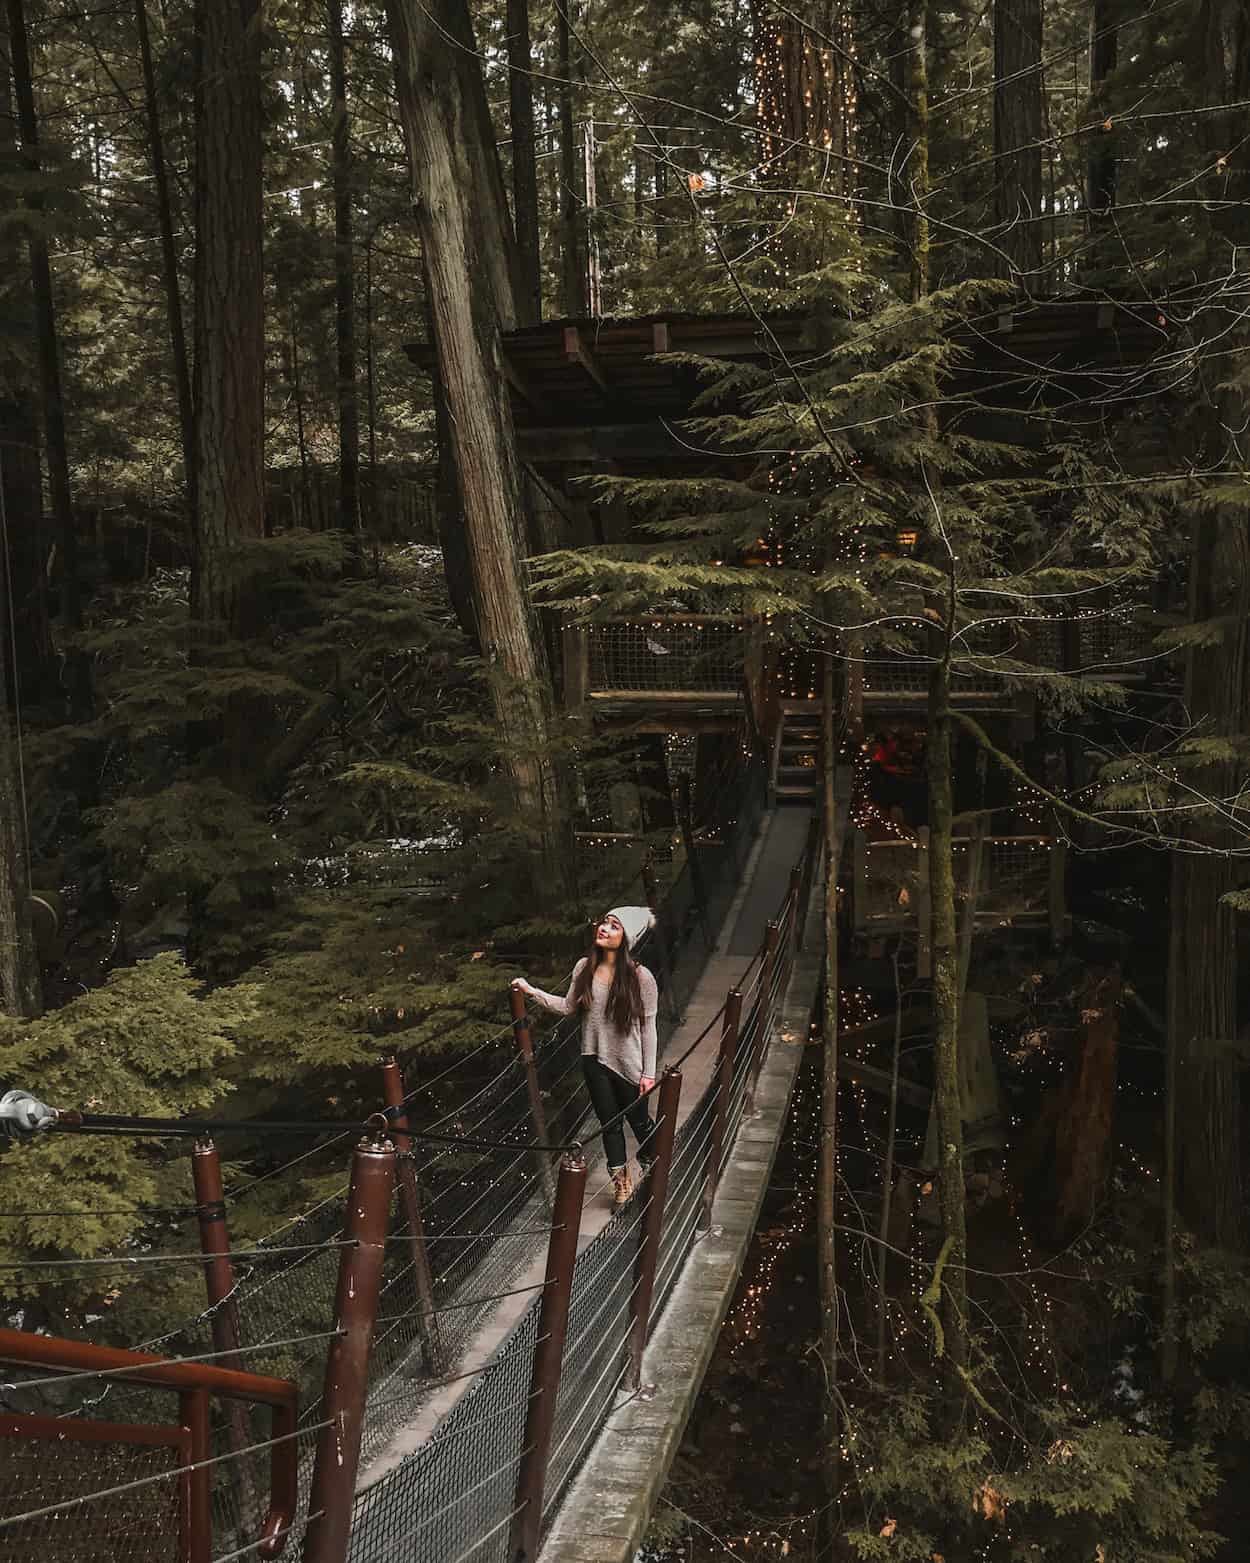 During the holiday and winter season, the Capilano Suspension Bridge in North Vancouver lights up with shimmering lights